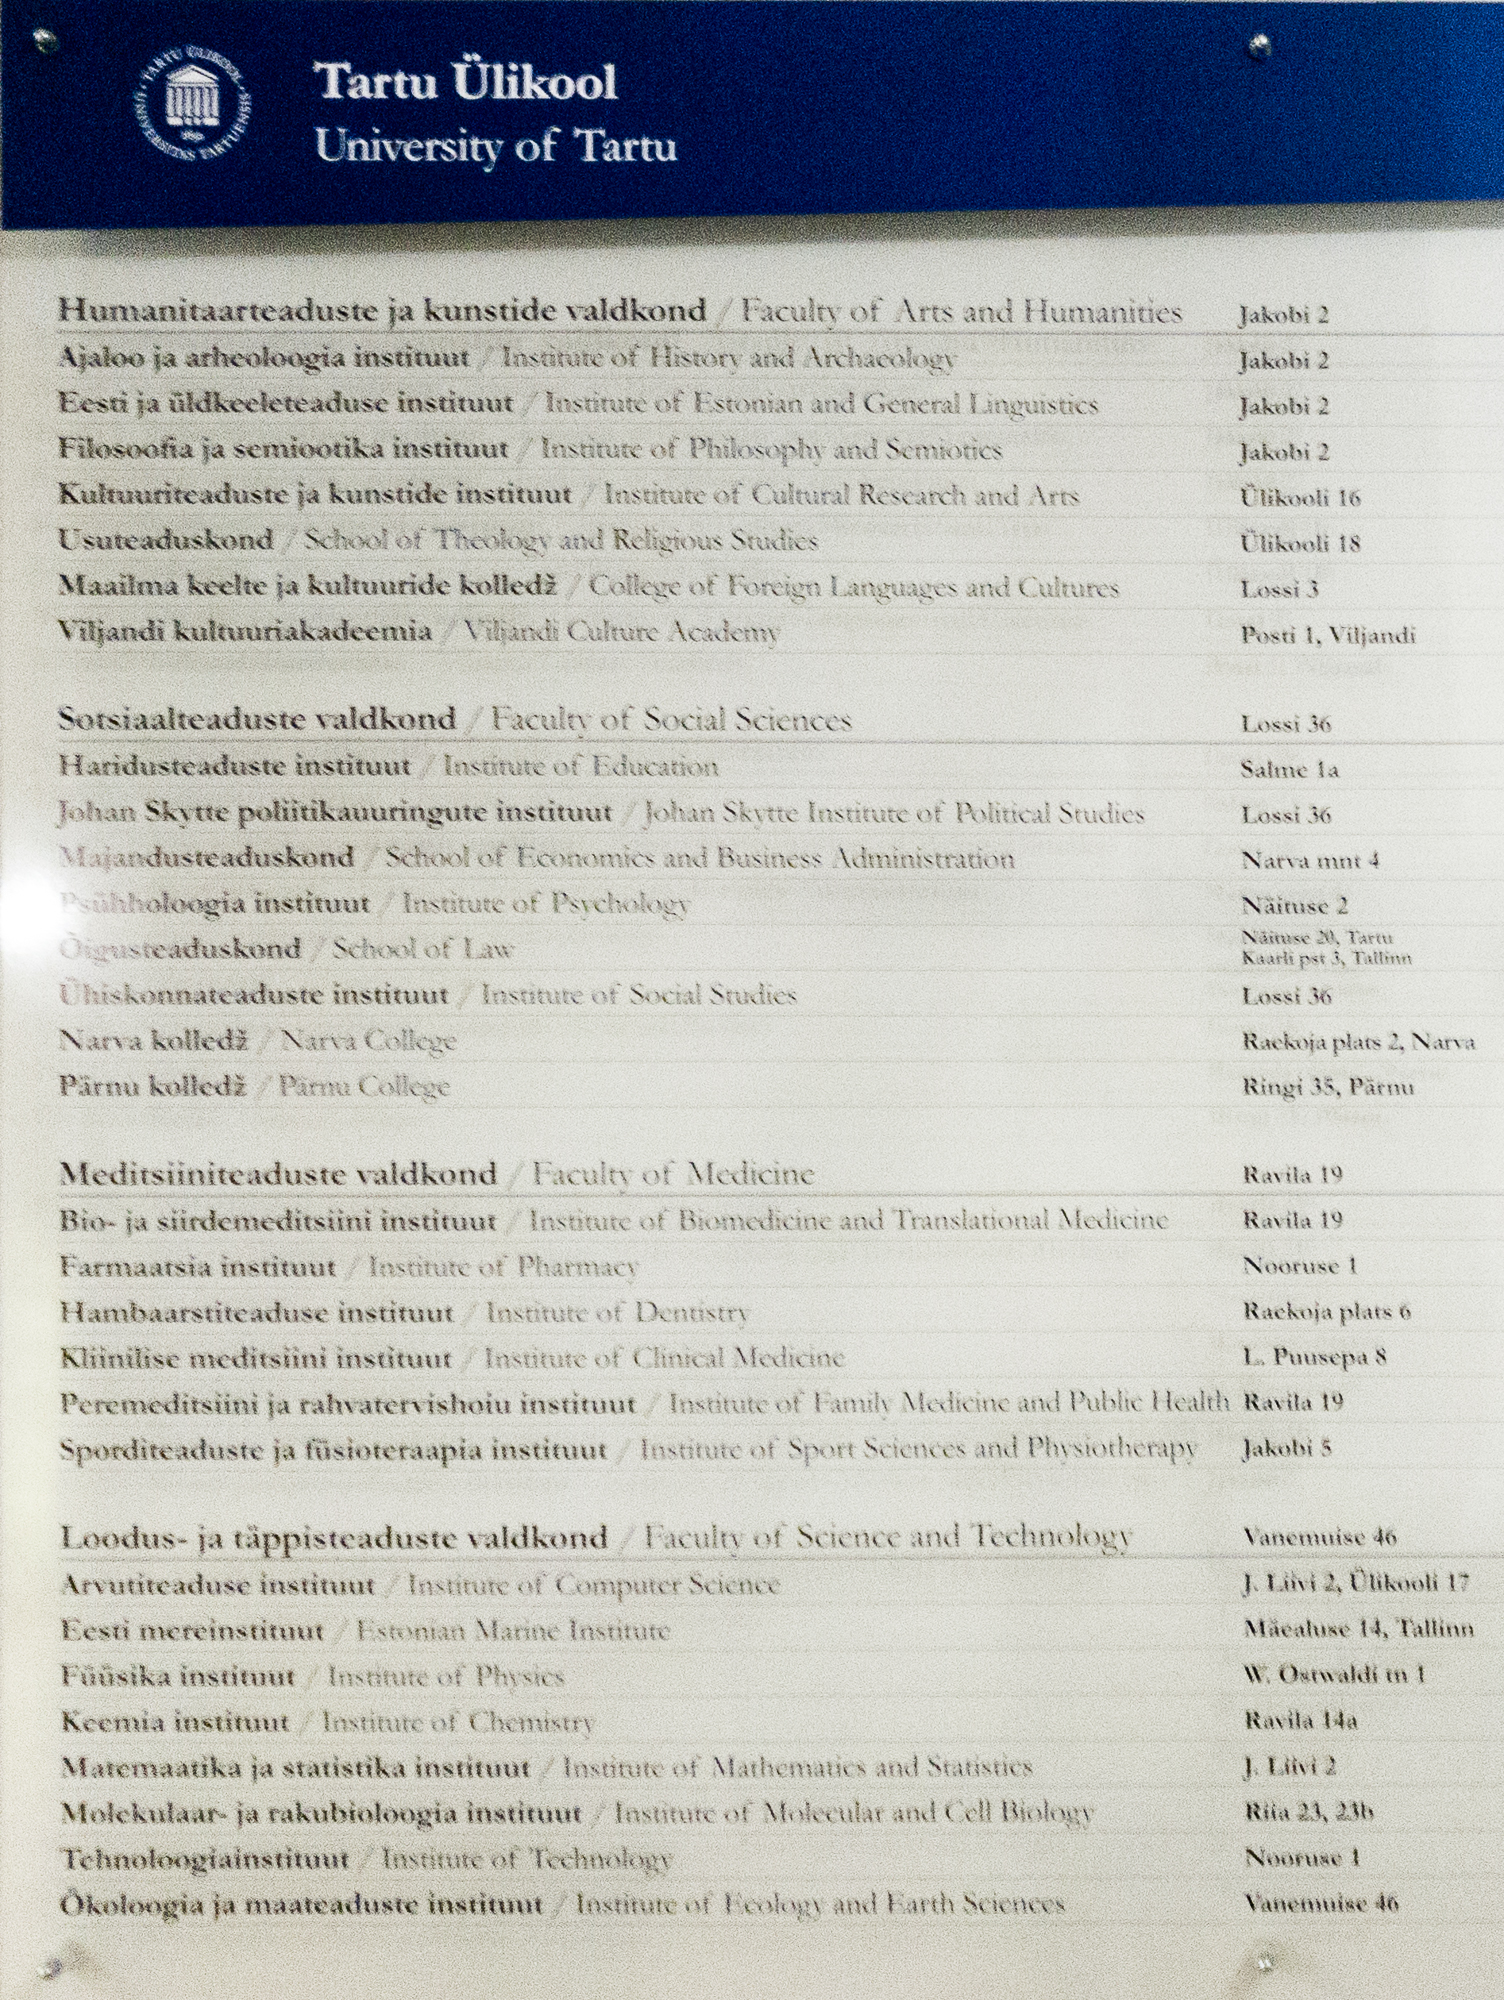 The faculties of the University of Tartu